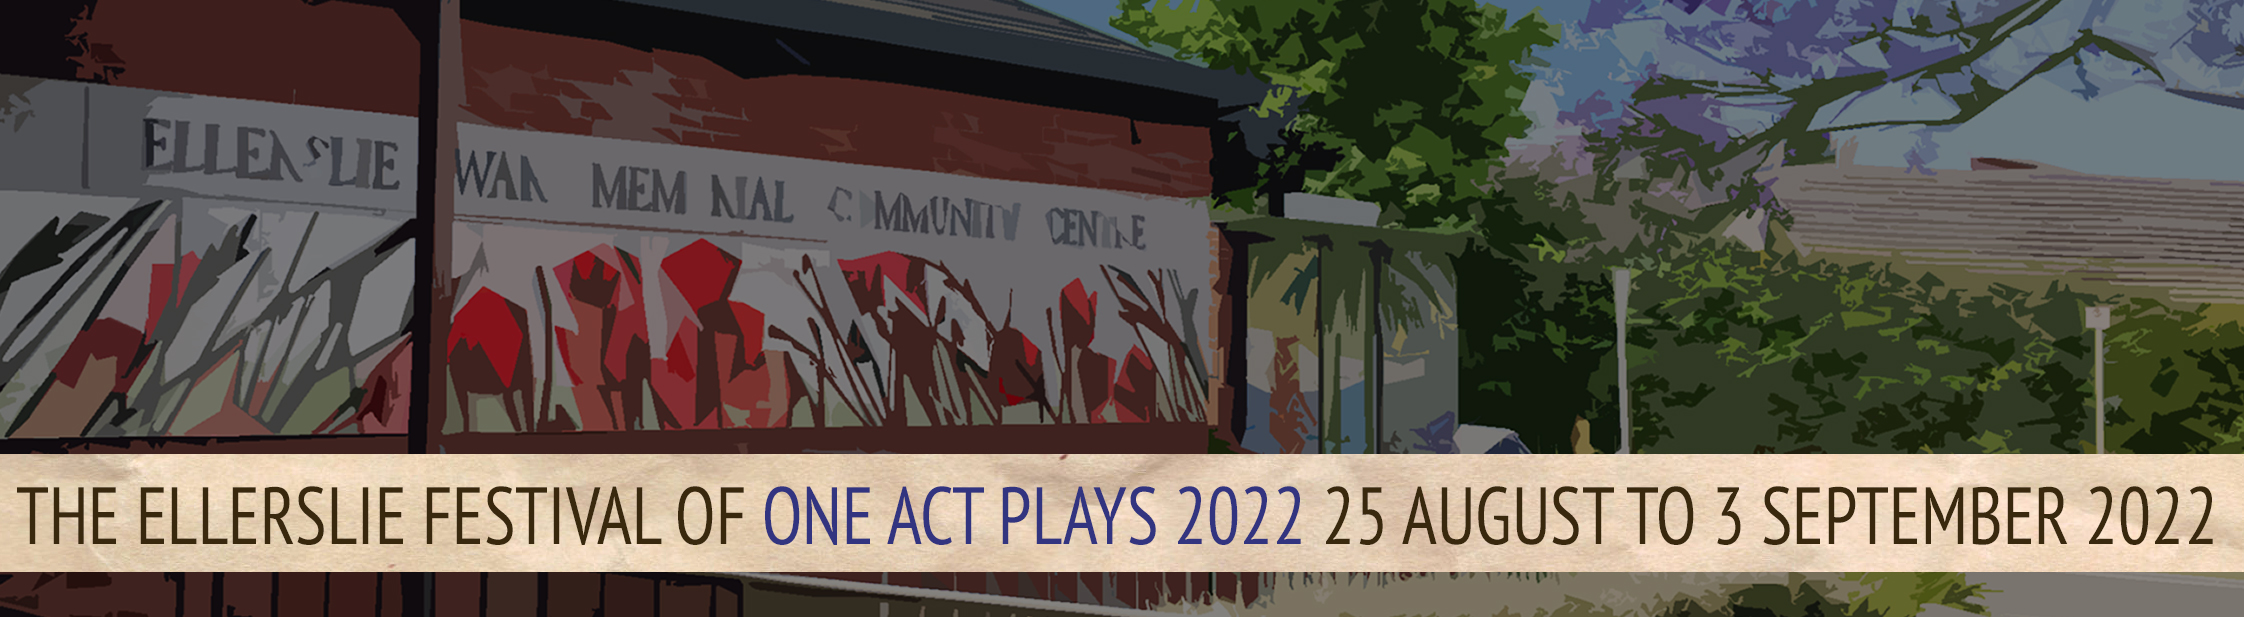 The Ellerslie Festival of One Act Plays 2022